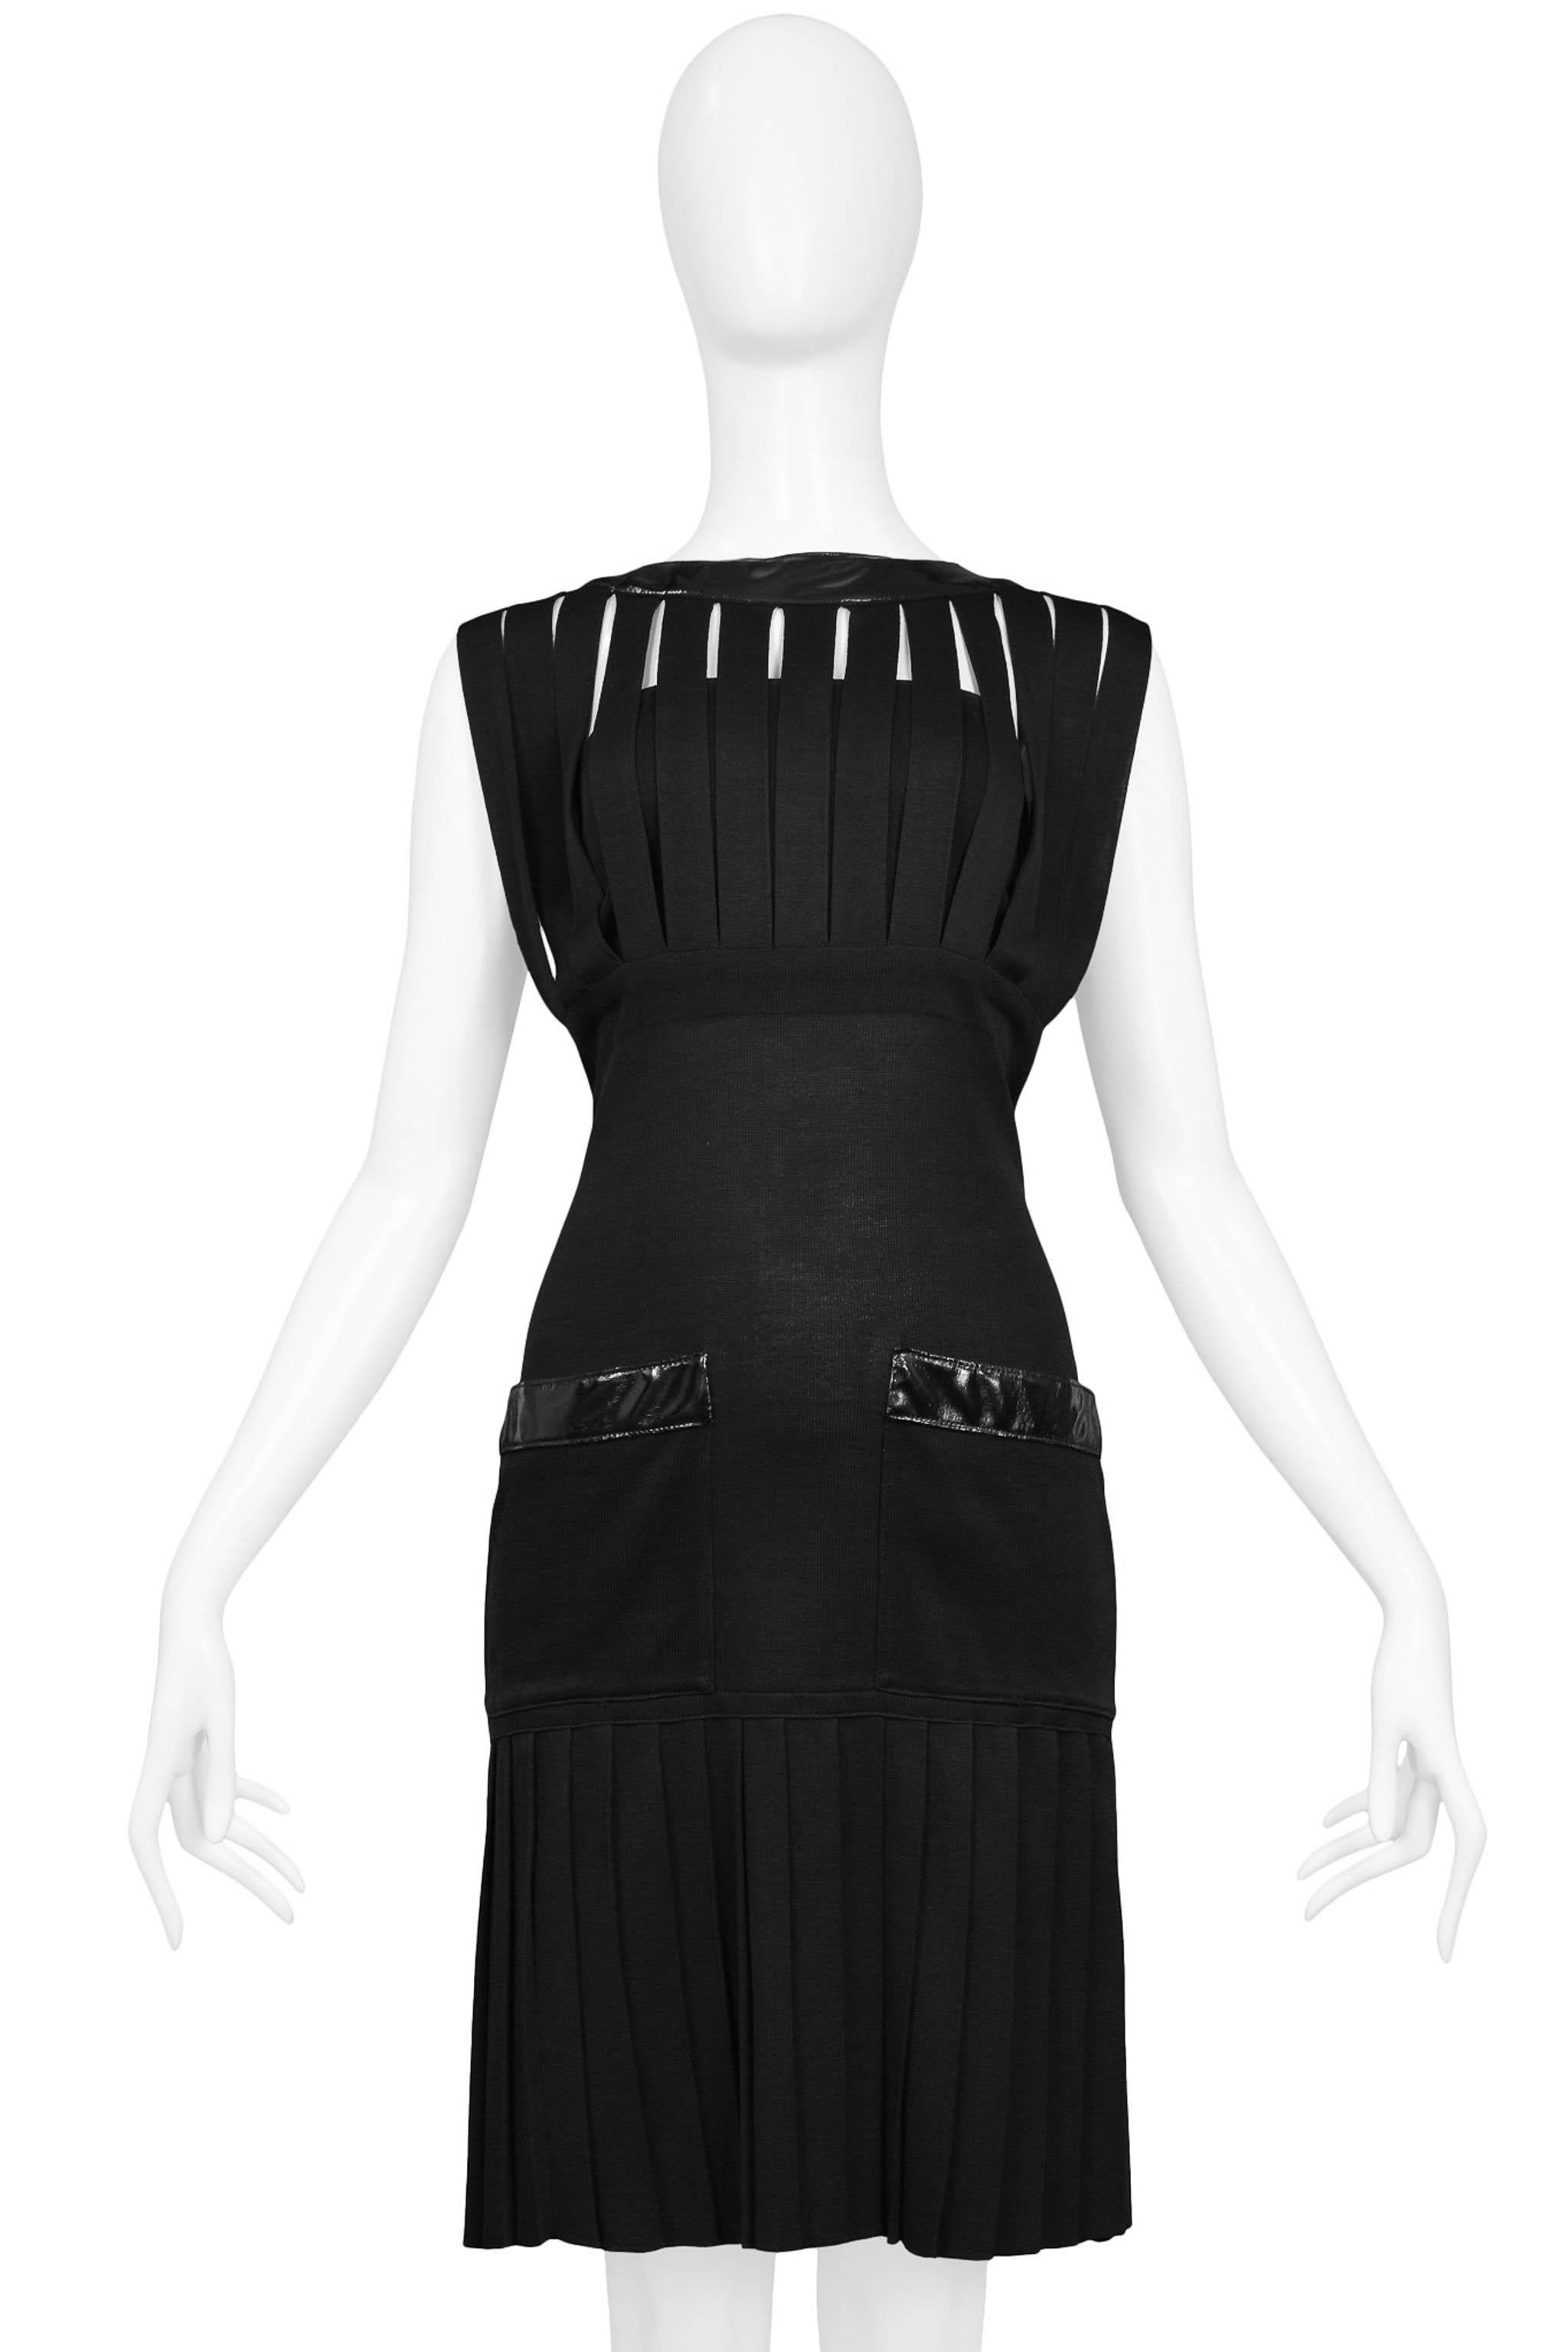 Chanel Black Knit & Wet Look Cage Dress In Good Condition For Sale In Los Angeles, CA